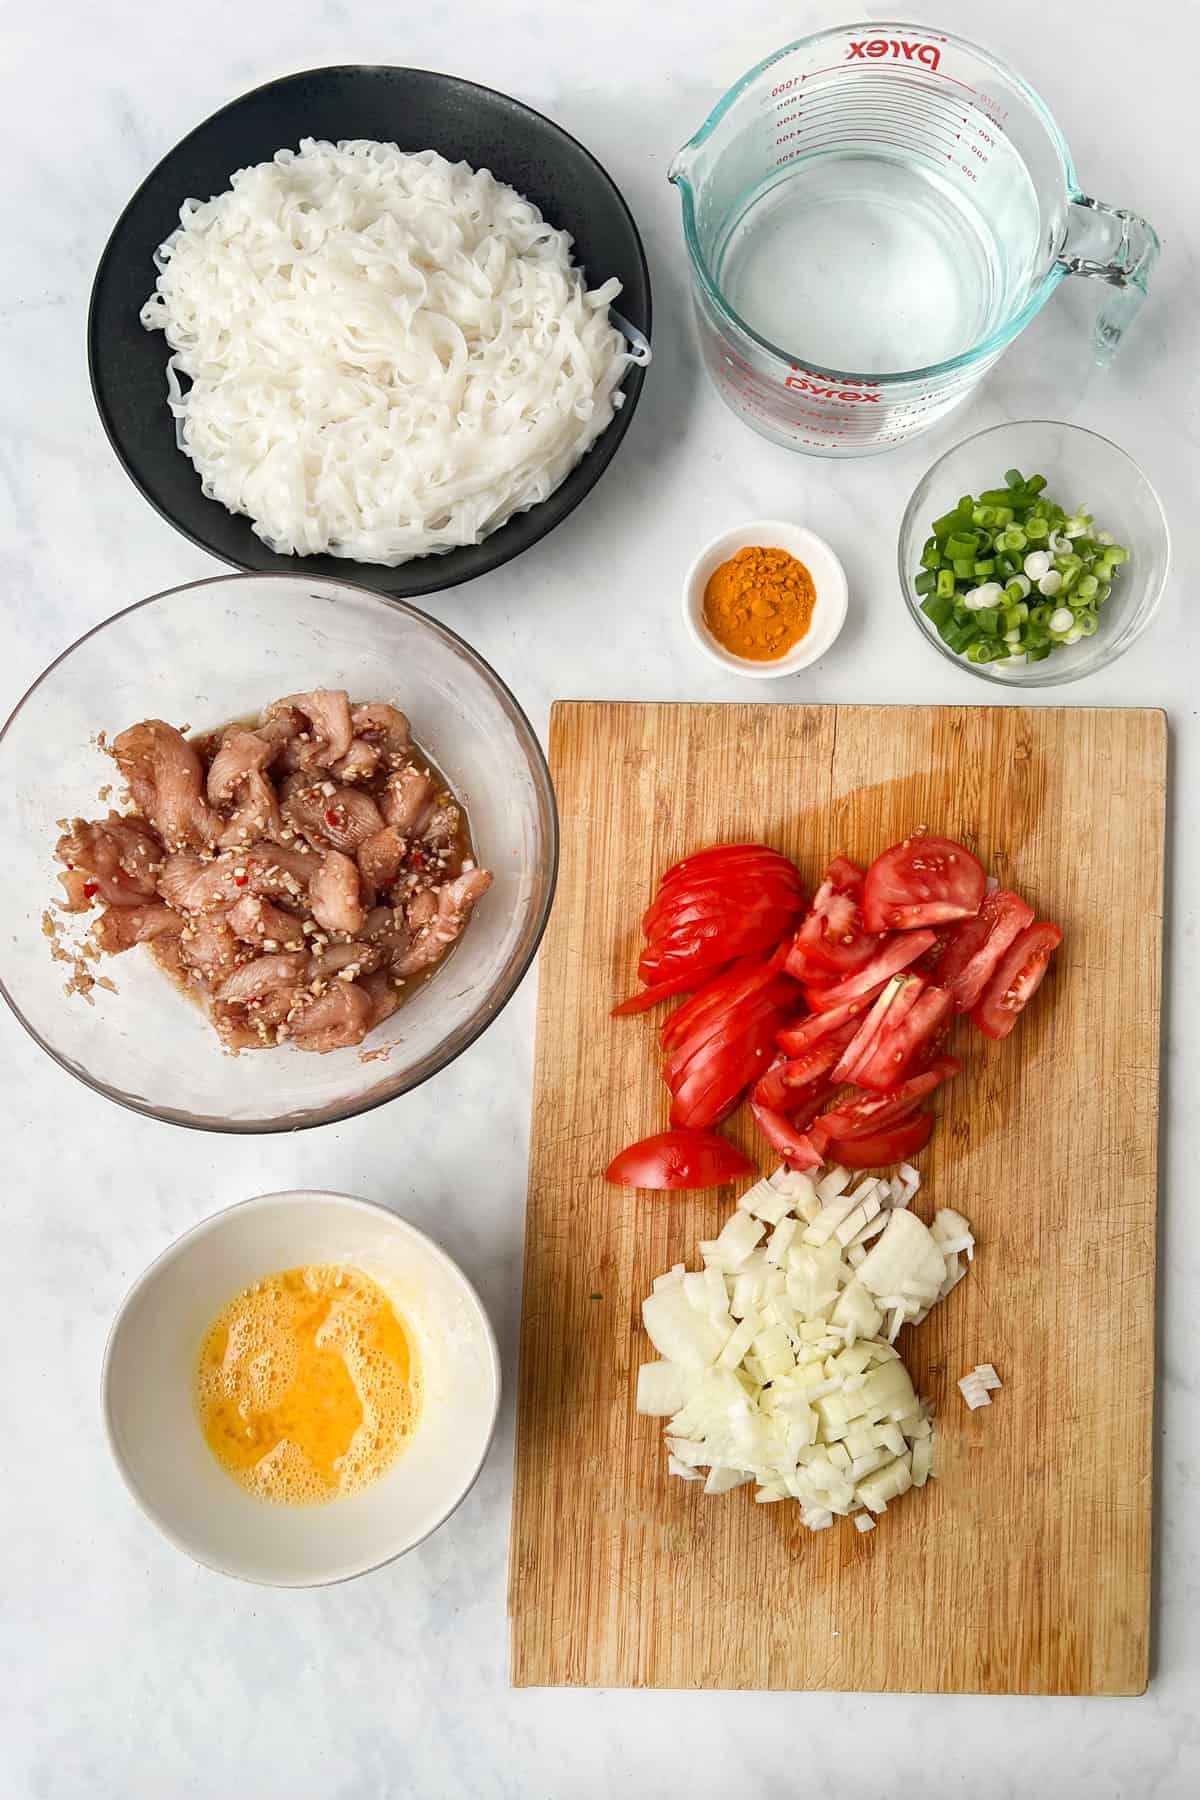 Ingredients on a marble countertop. Chopped onions, sliced tomatoes, chopped scallions, sliced chicken breast, a whisked egg, turmeric in a small bowl, a 4-cup measuring cup filled with water.